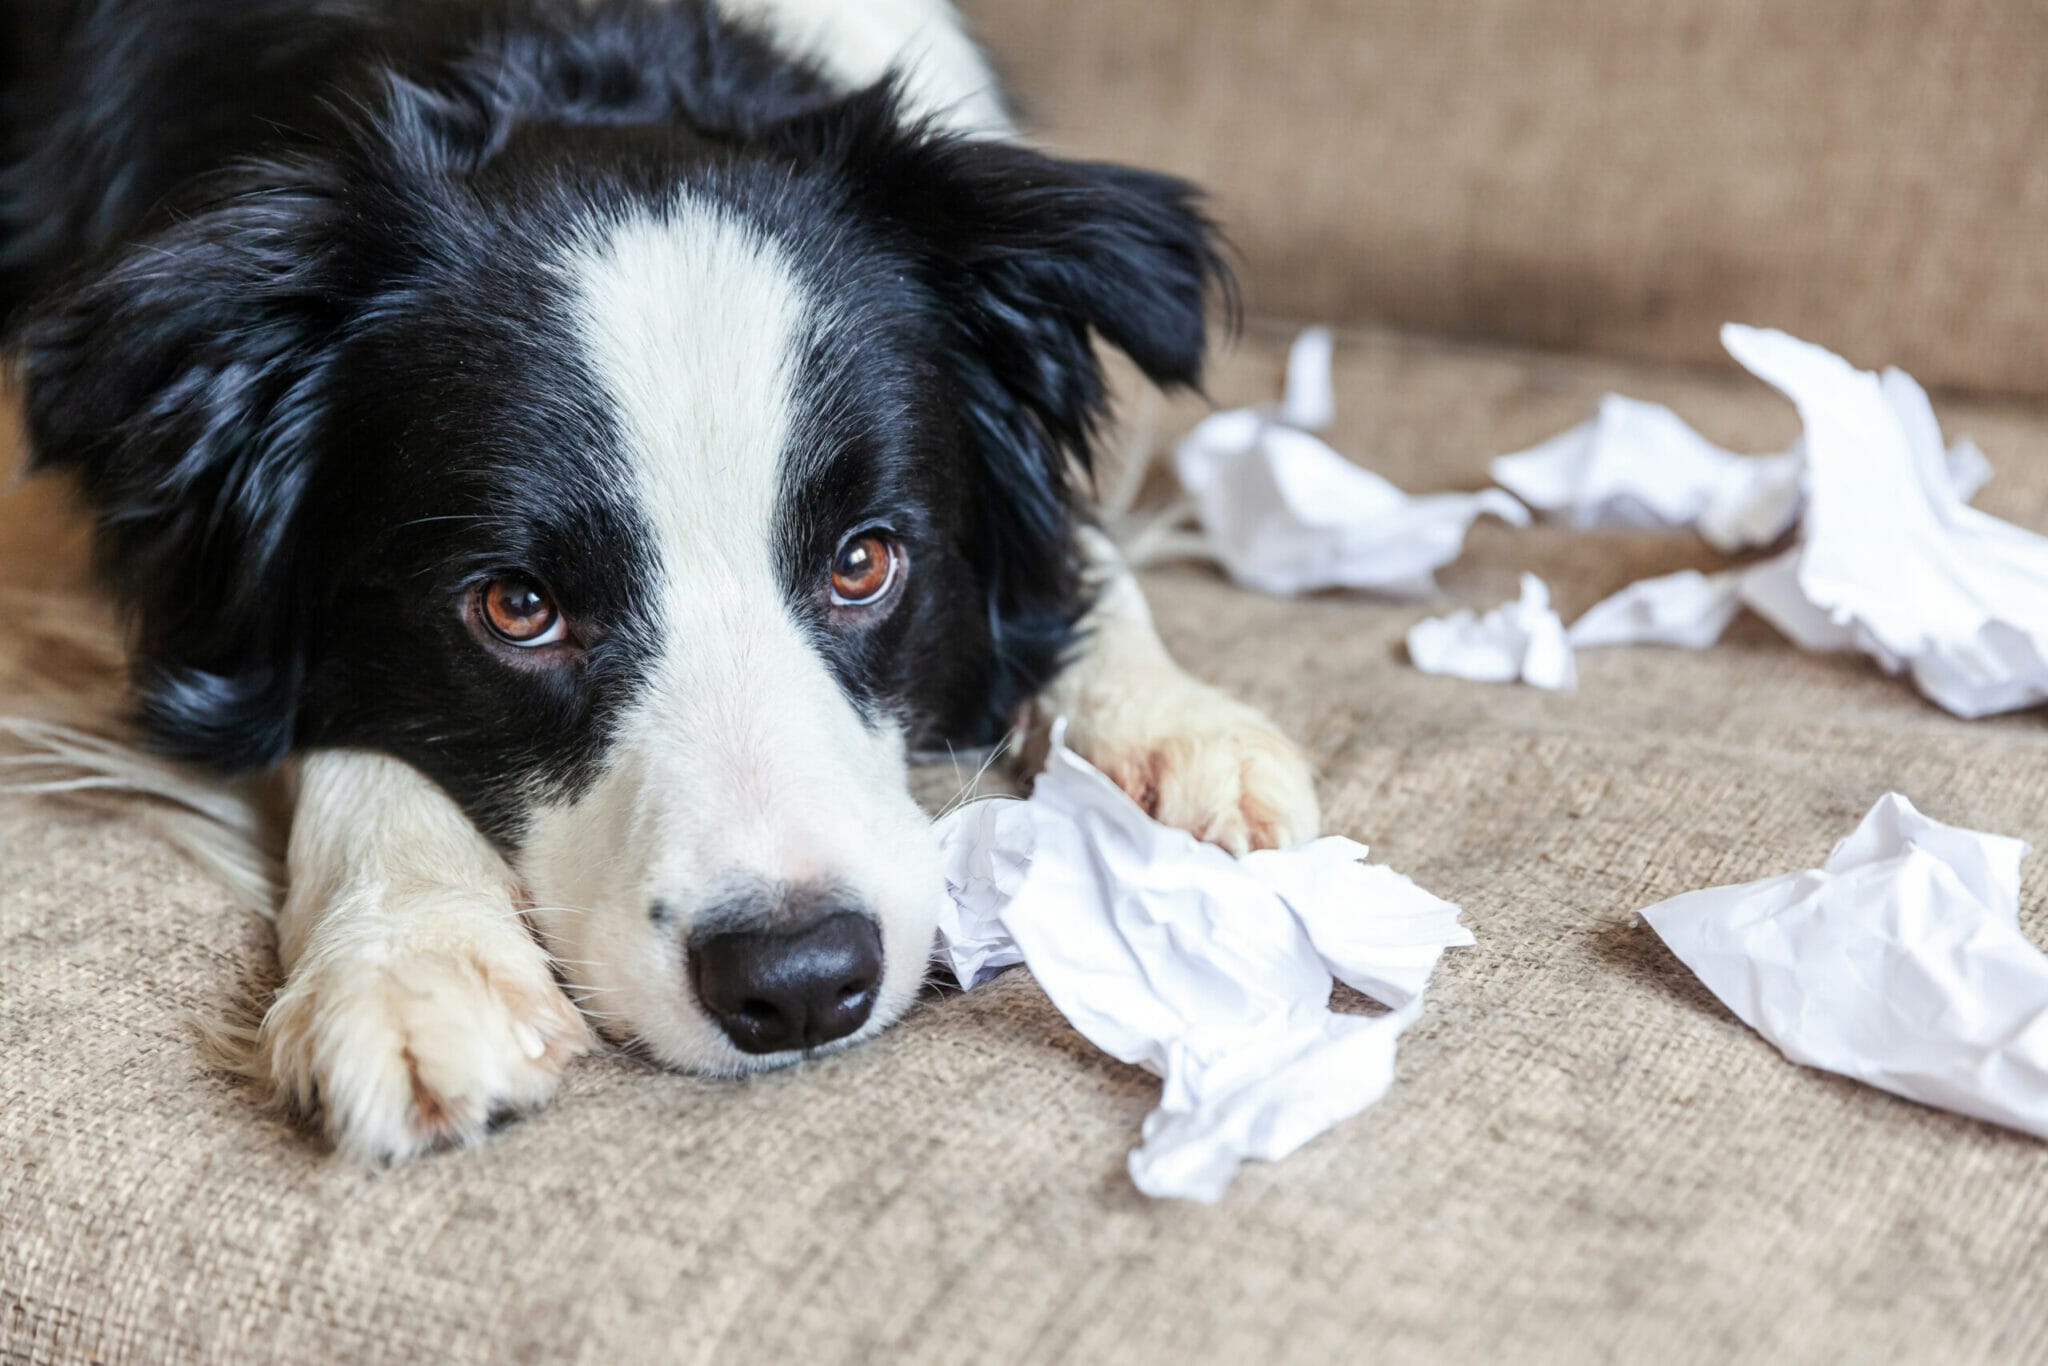 How does eating toilet paper harm your dog?